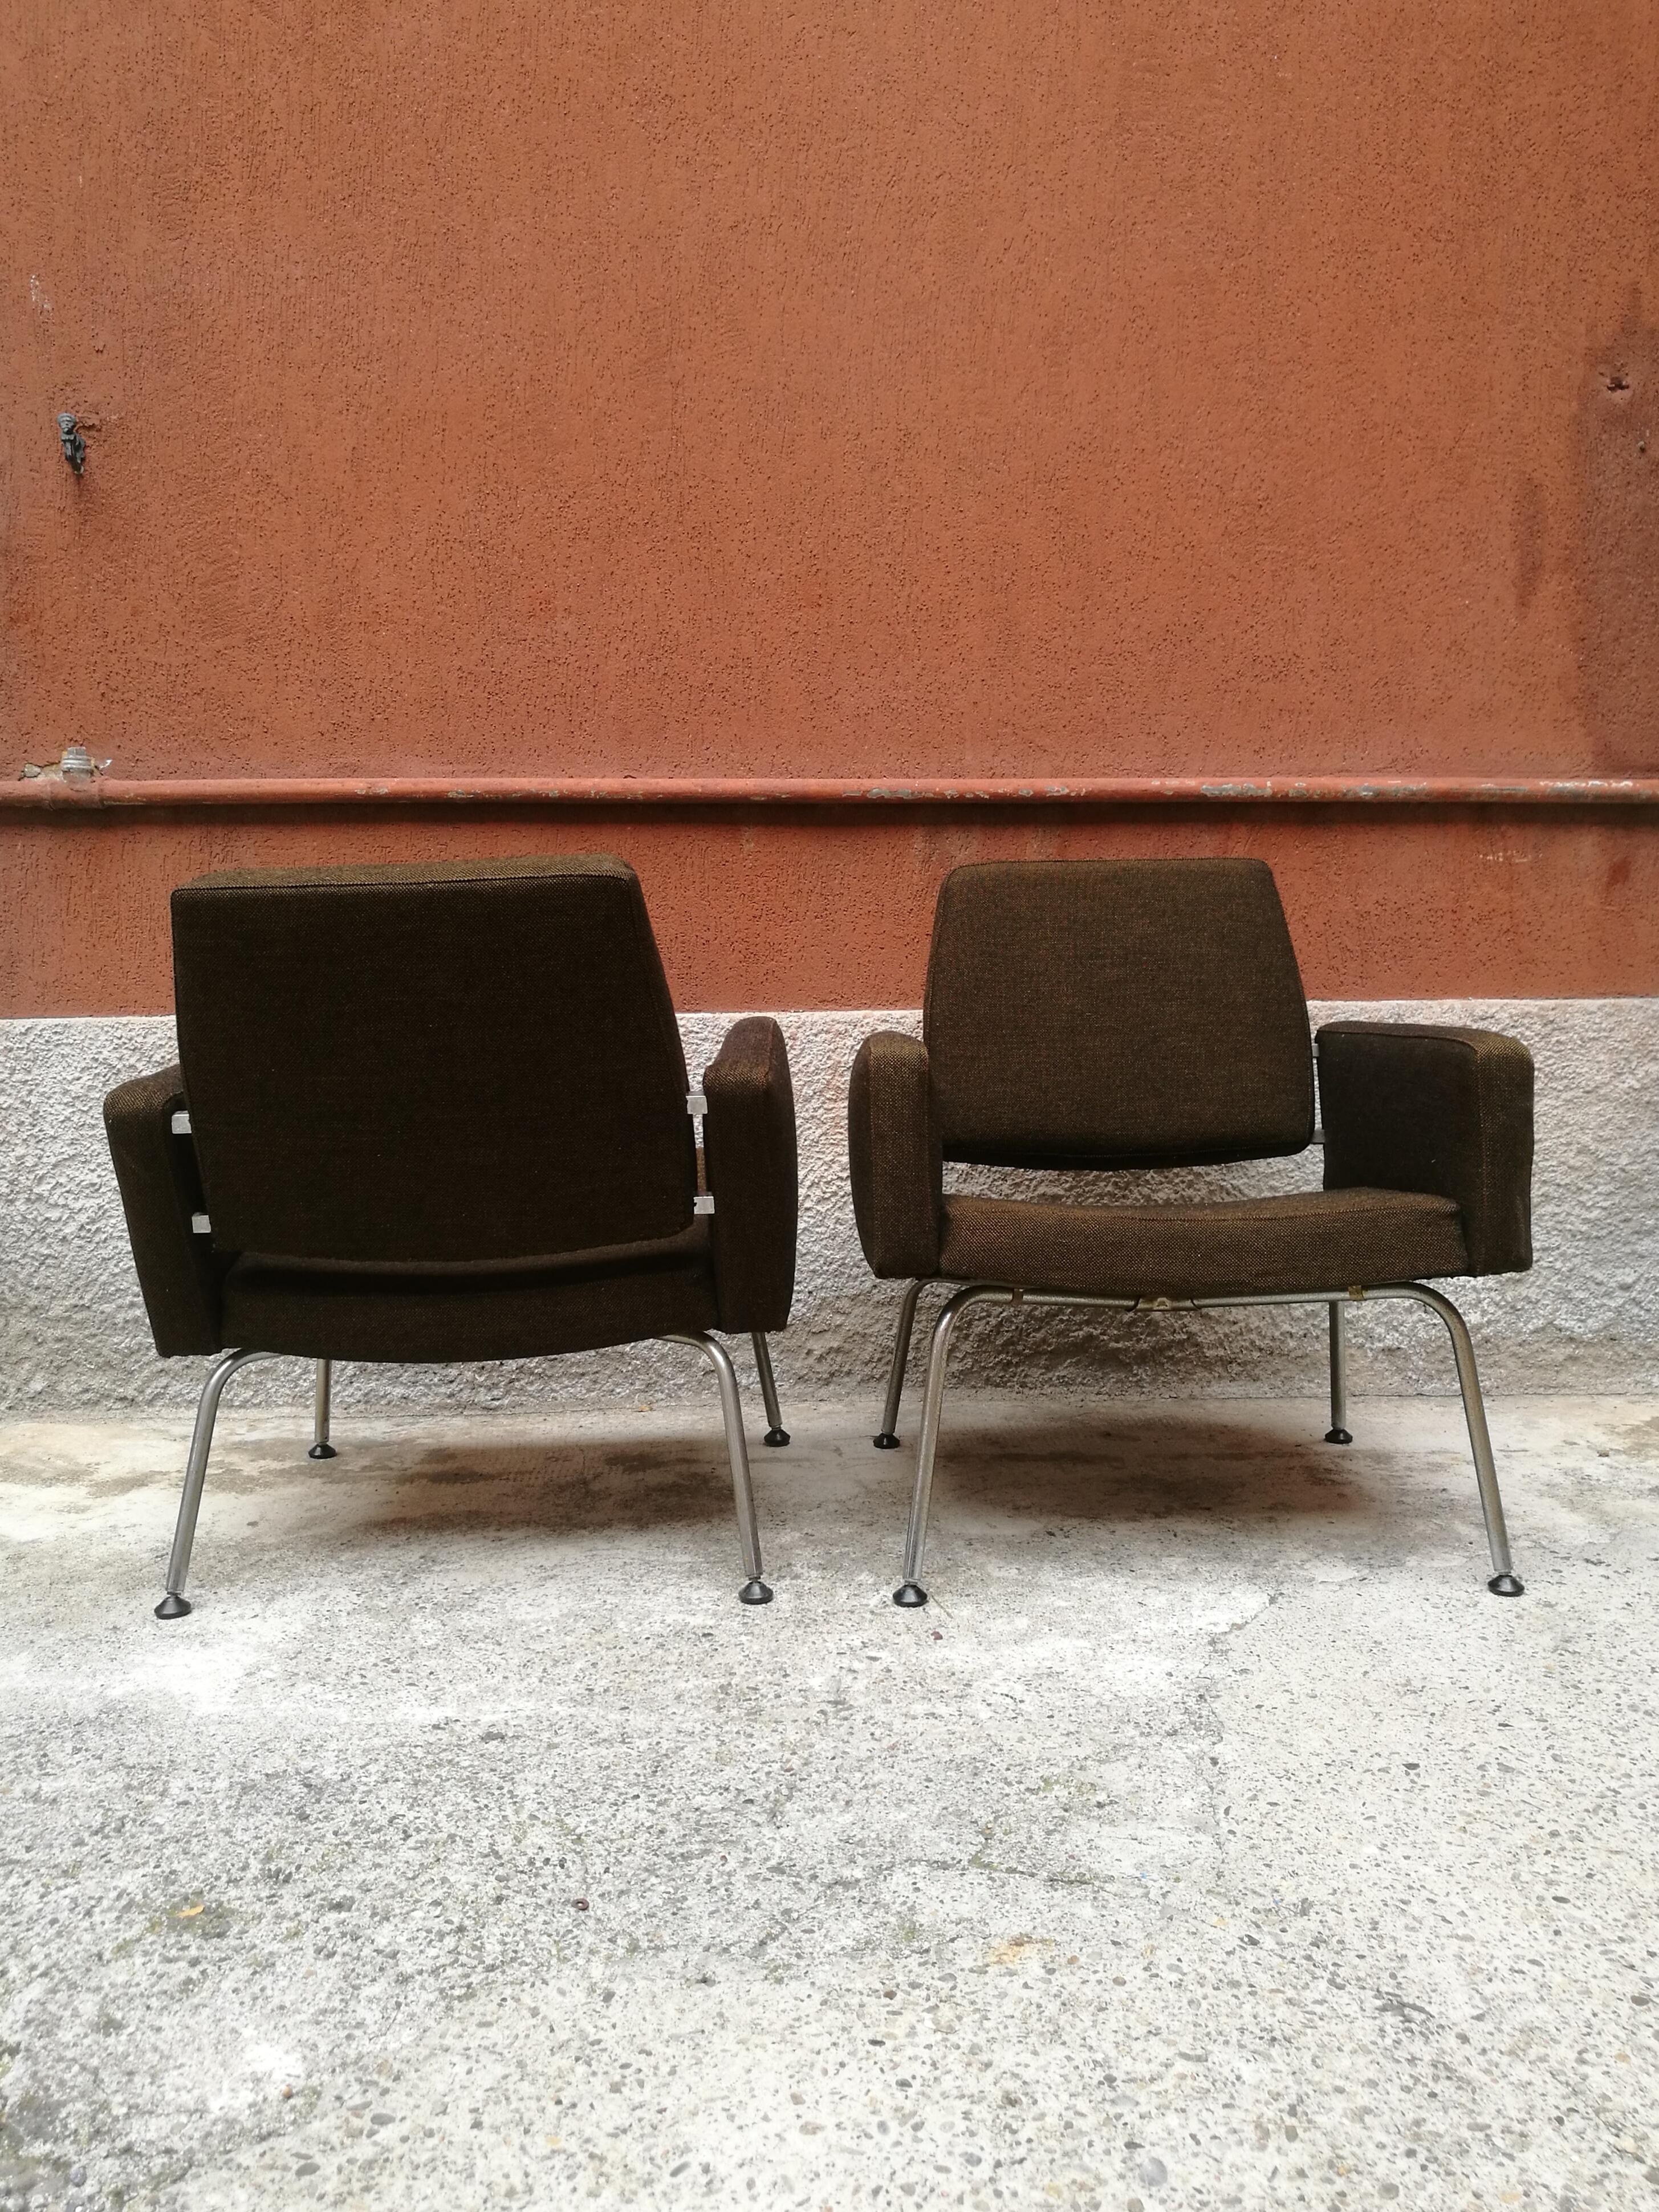 Italian Steel and Original Fabric Armchairs, 1960s For Sale 1